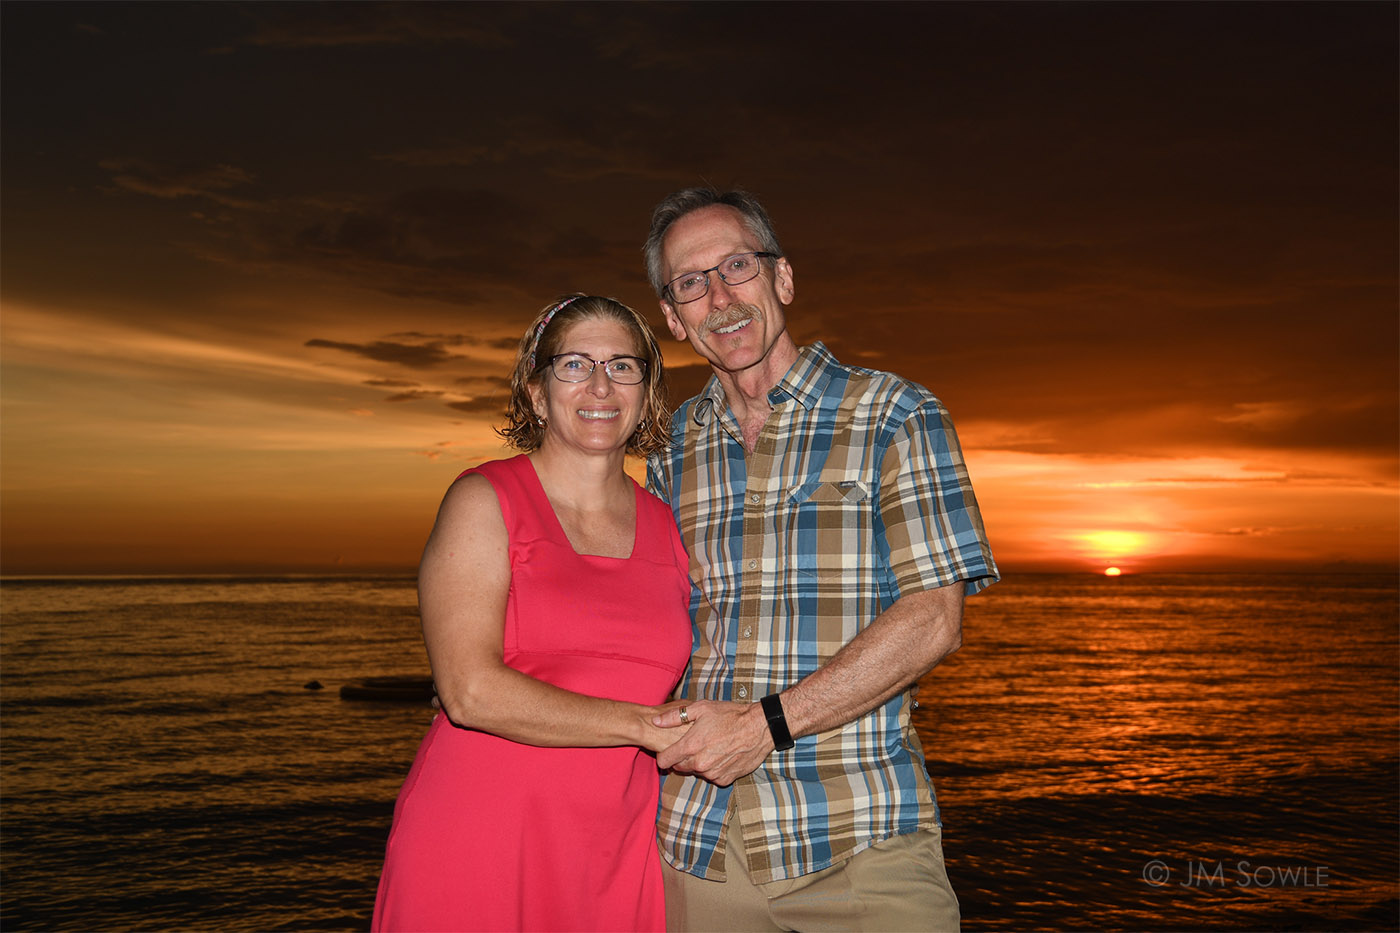 530915075Adj_1400.jpg - We rarely pulled out our DSLRs, but this sunset was so epic that asked one of the resort photogs to snap a shot of us (which we then purchase from the resort).